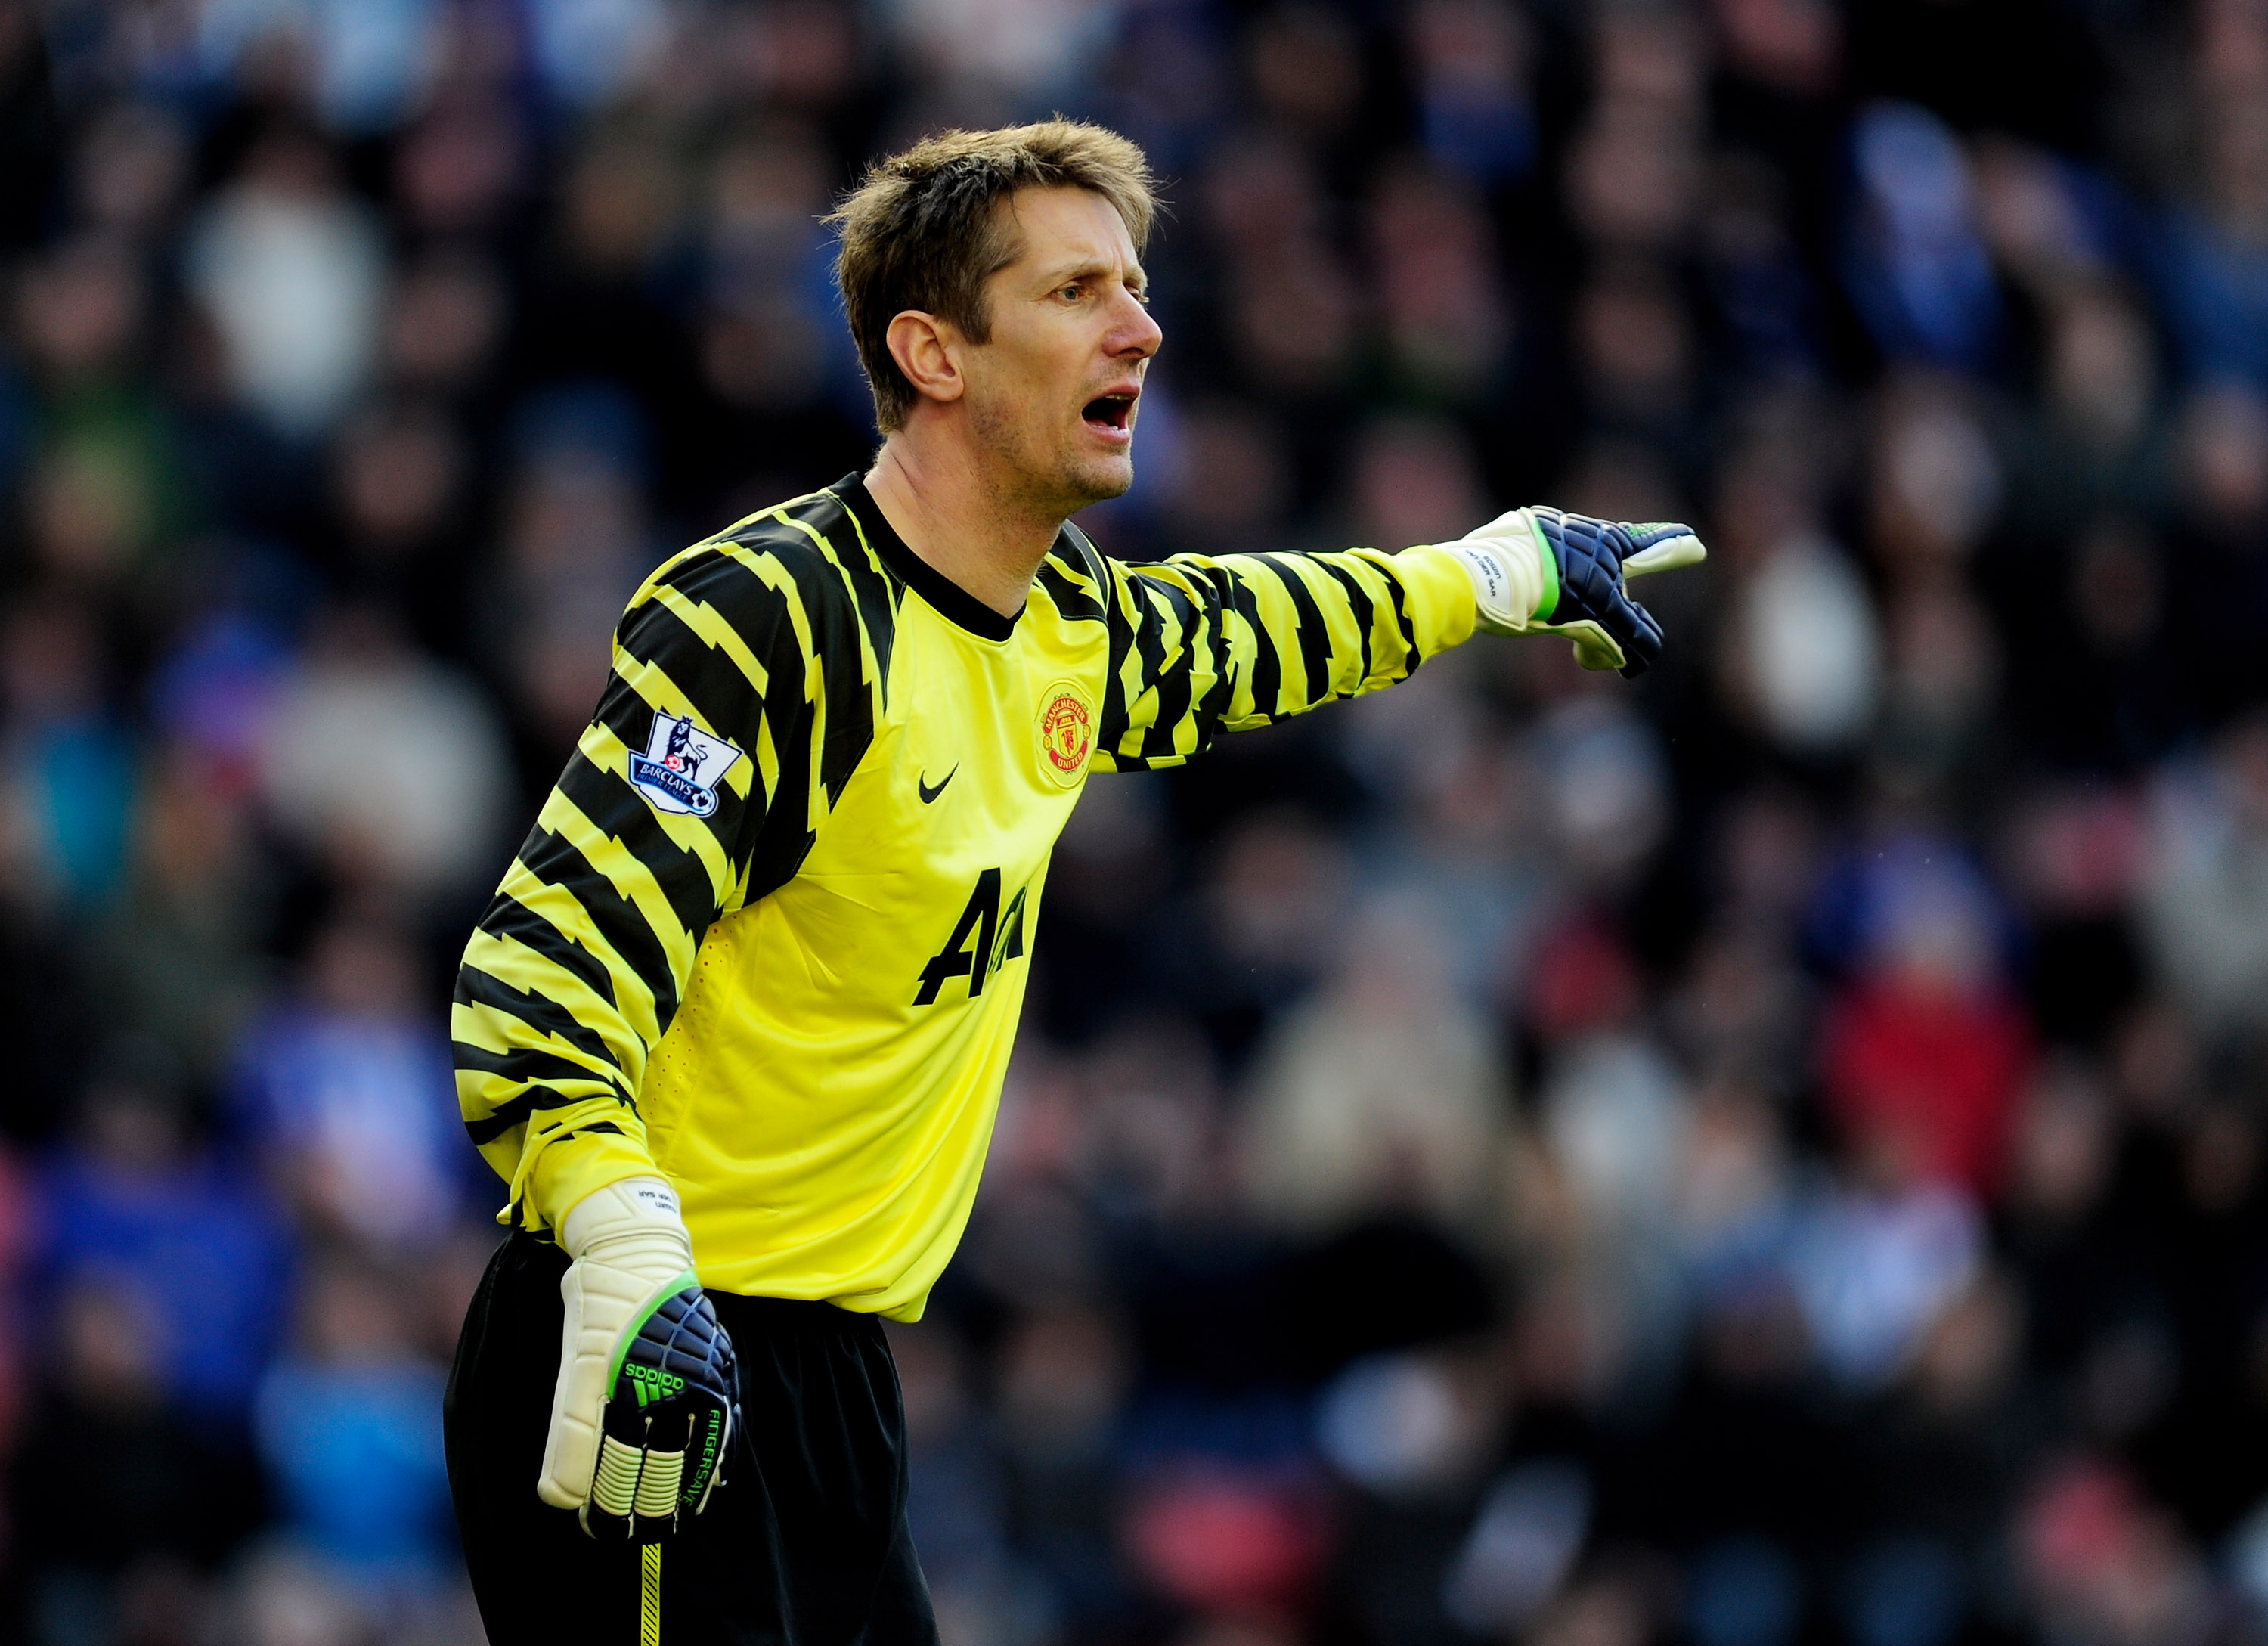 WIGAN, ENGLAND - FEBRUARY 26:  Edwin van der Sar of Manchester United gestures during the Barclays Premier League match between Wigan Athletic and Manchester United at the DW Stadium on February 26, 2011 in Wigan, England.  (Photo by Jamie McDonald/Getty